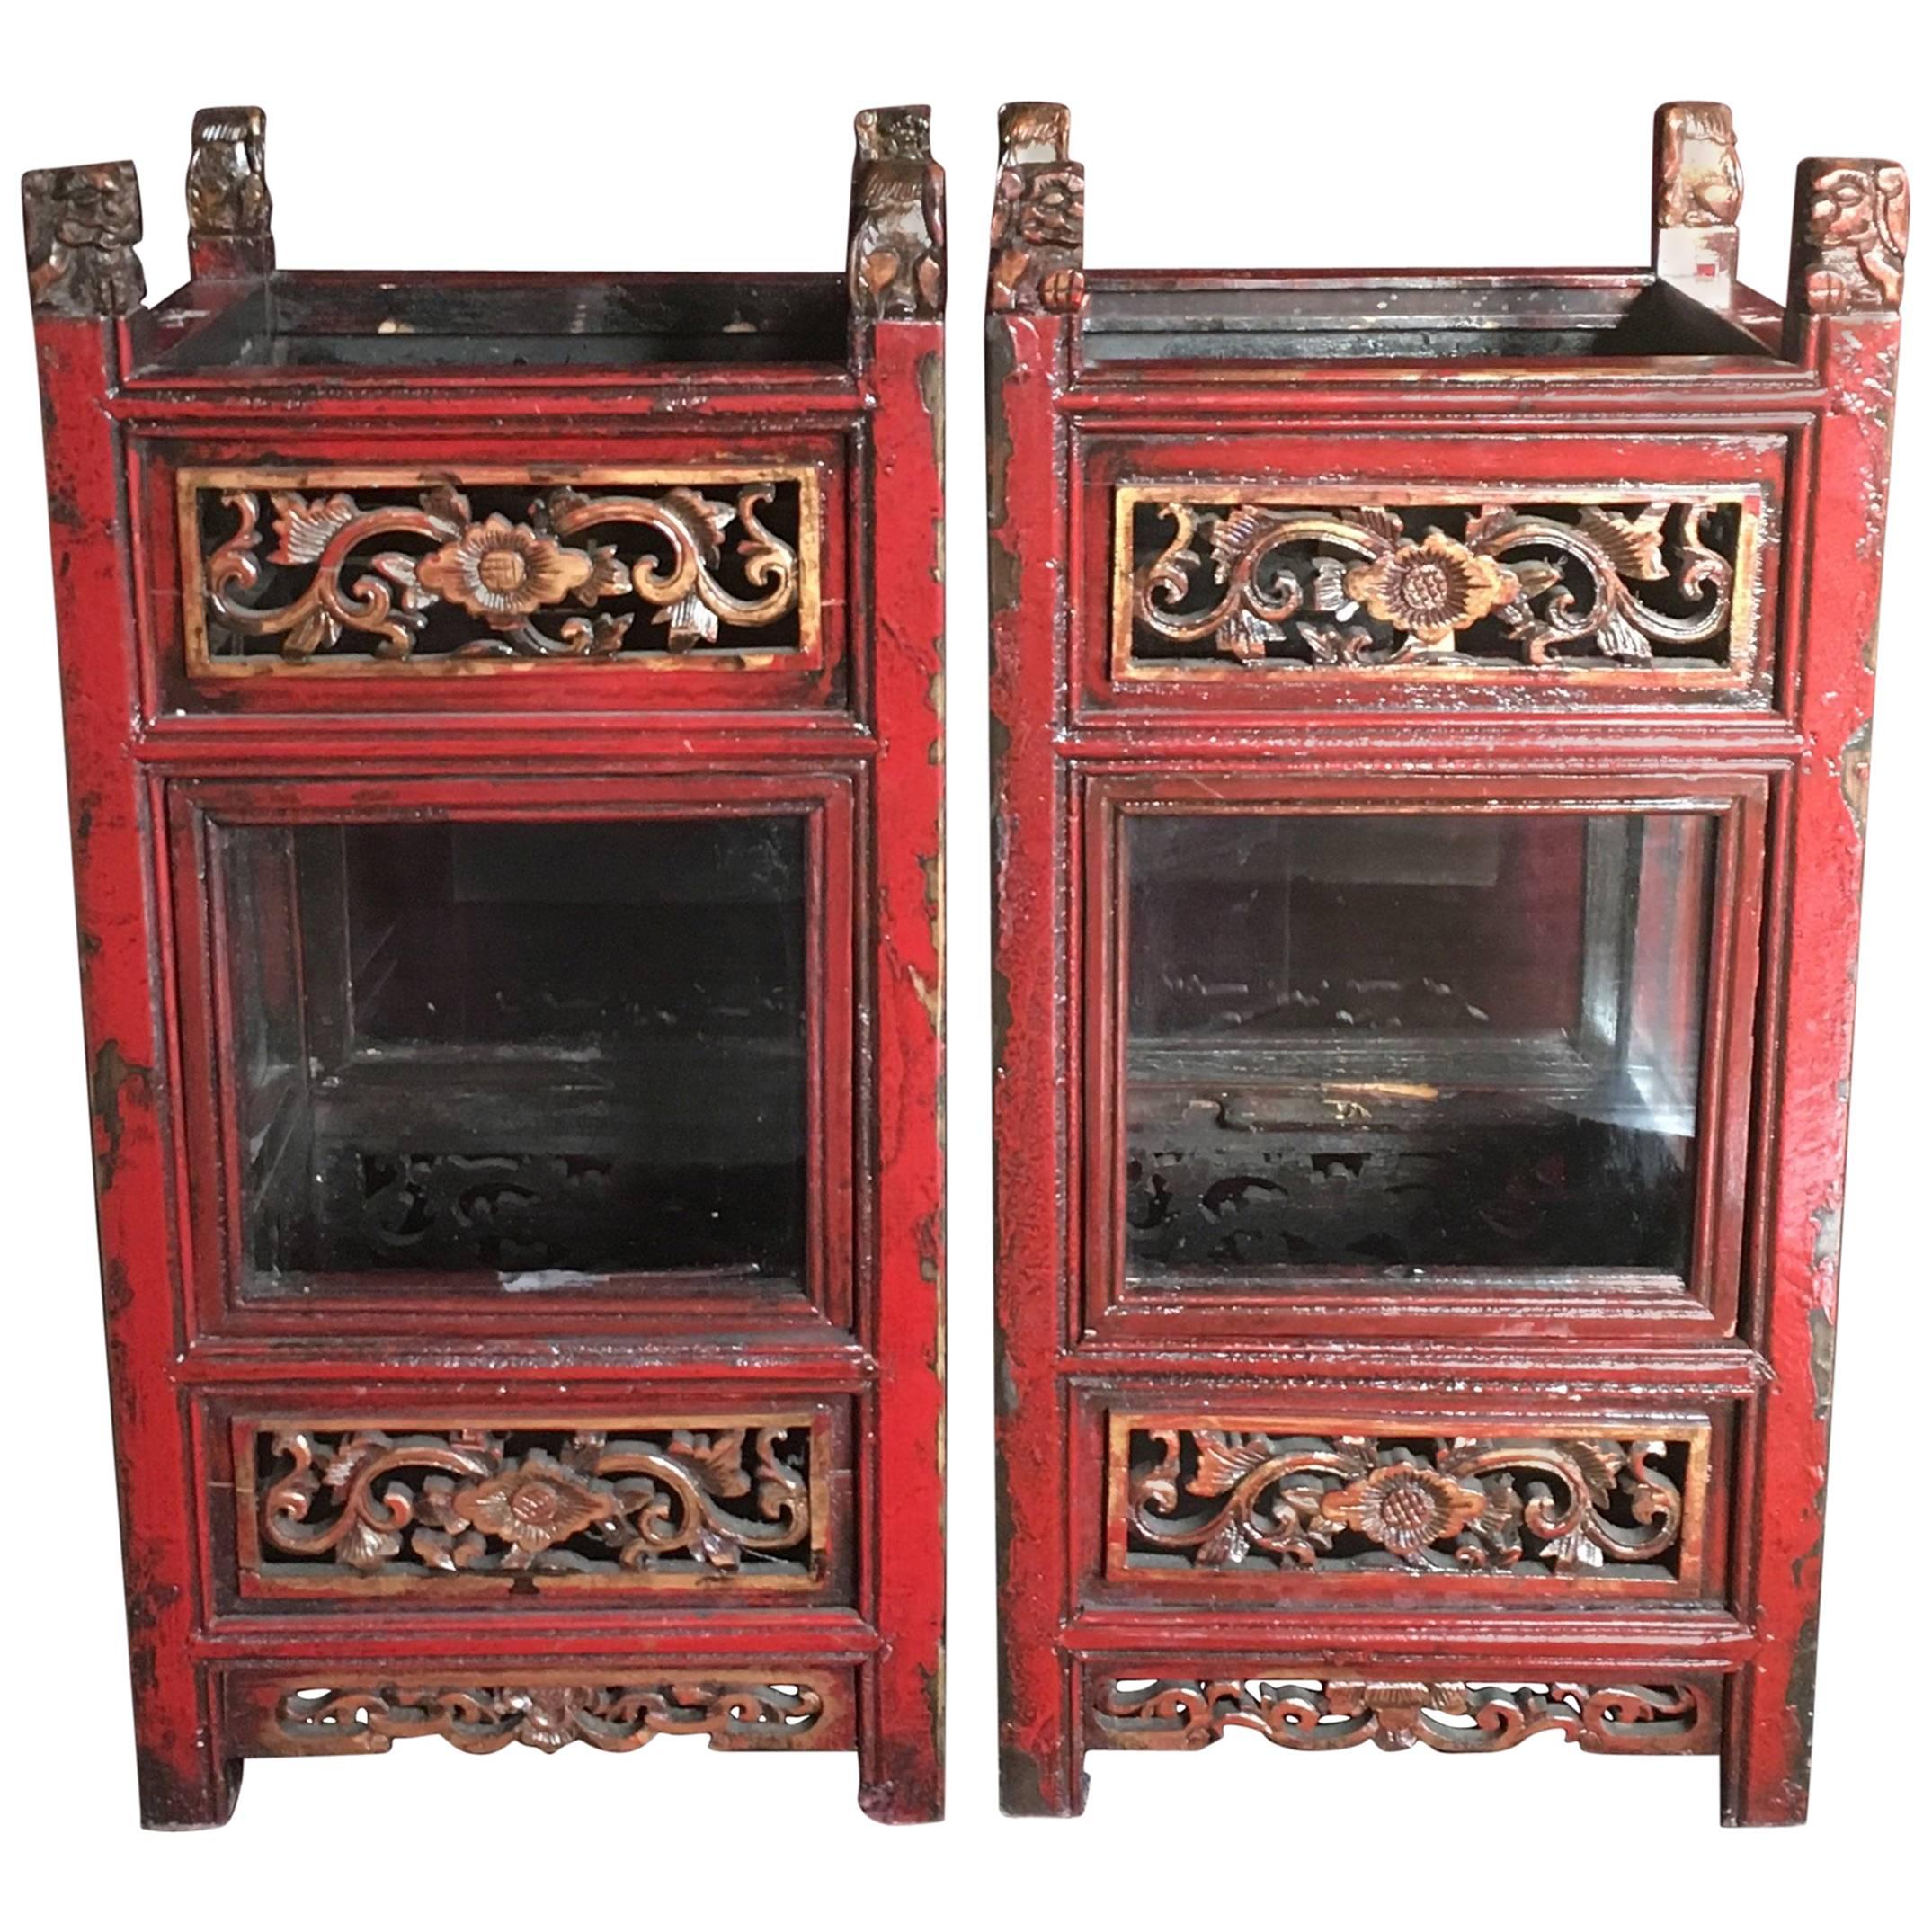 Pair of Vintage Chinese Carved Wooden Glazed Candle Lanterns, circa 1950